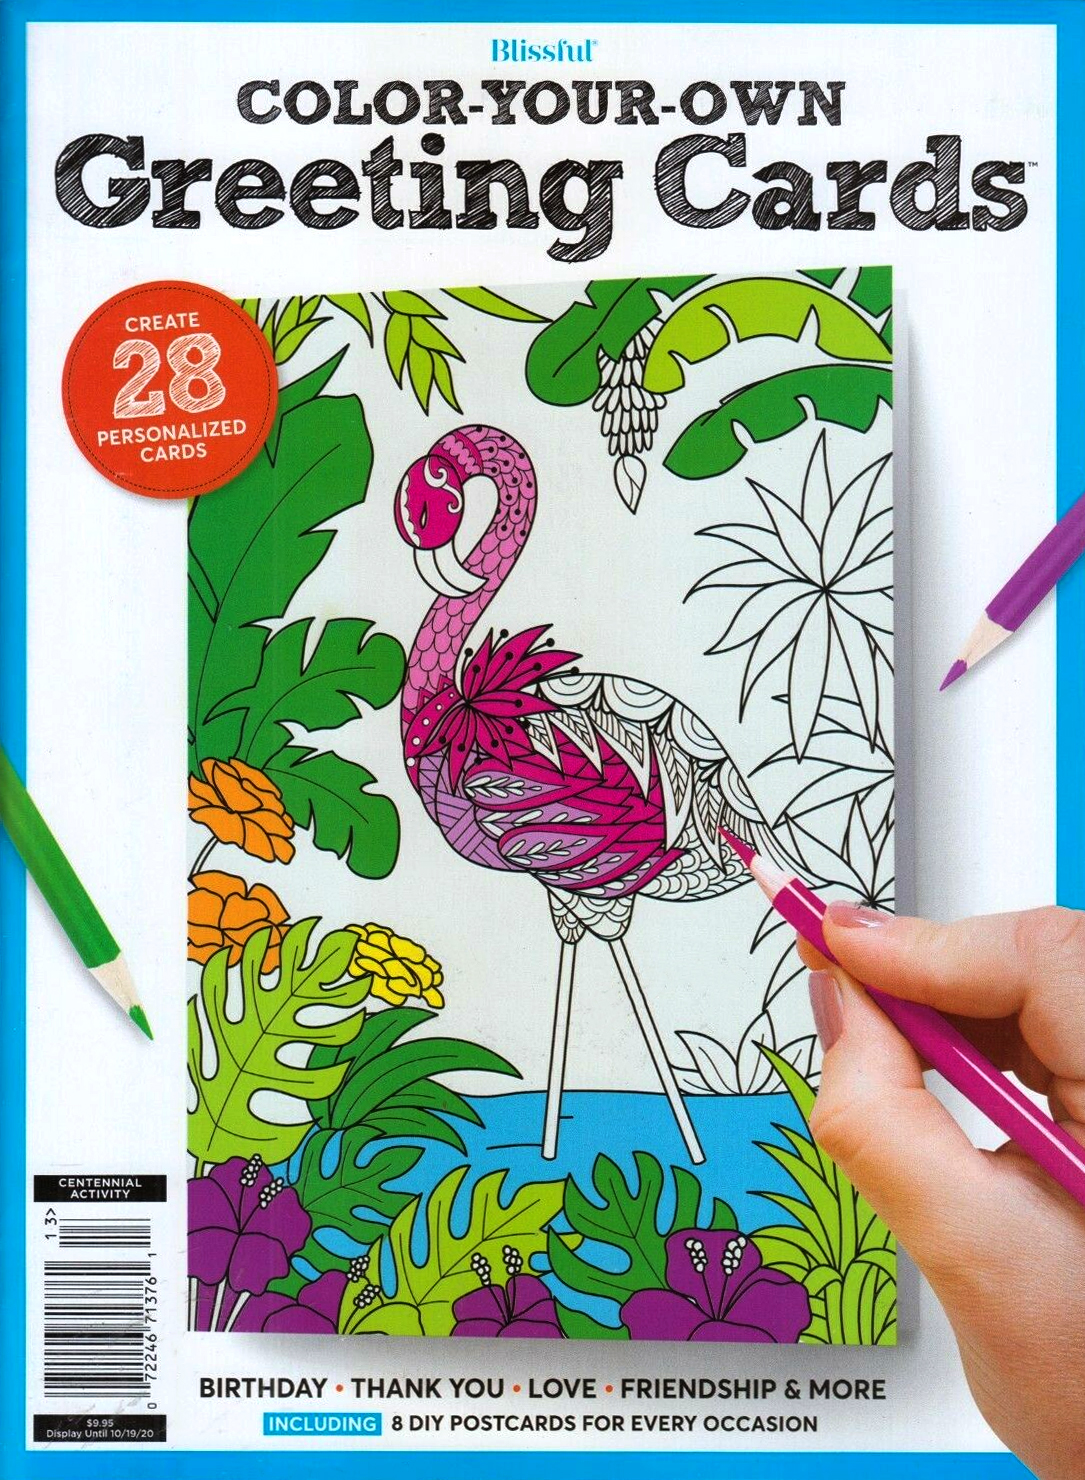 color-your-own-greeting-cards-subscription-magazine-agent